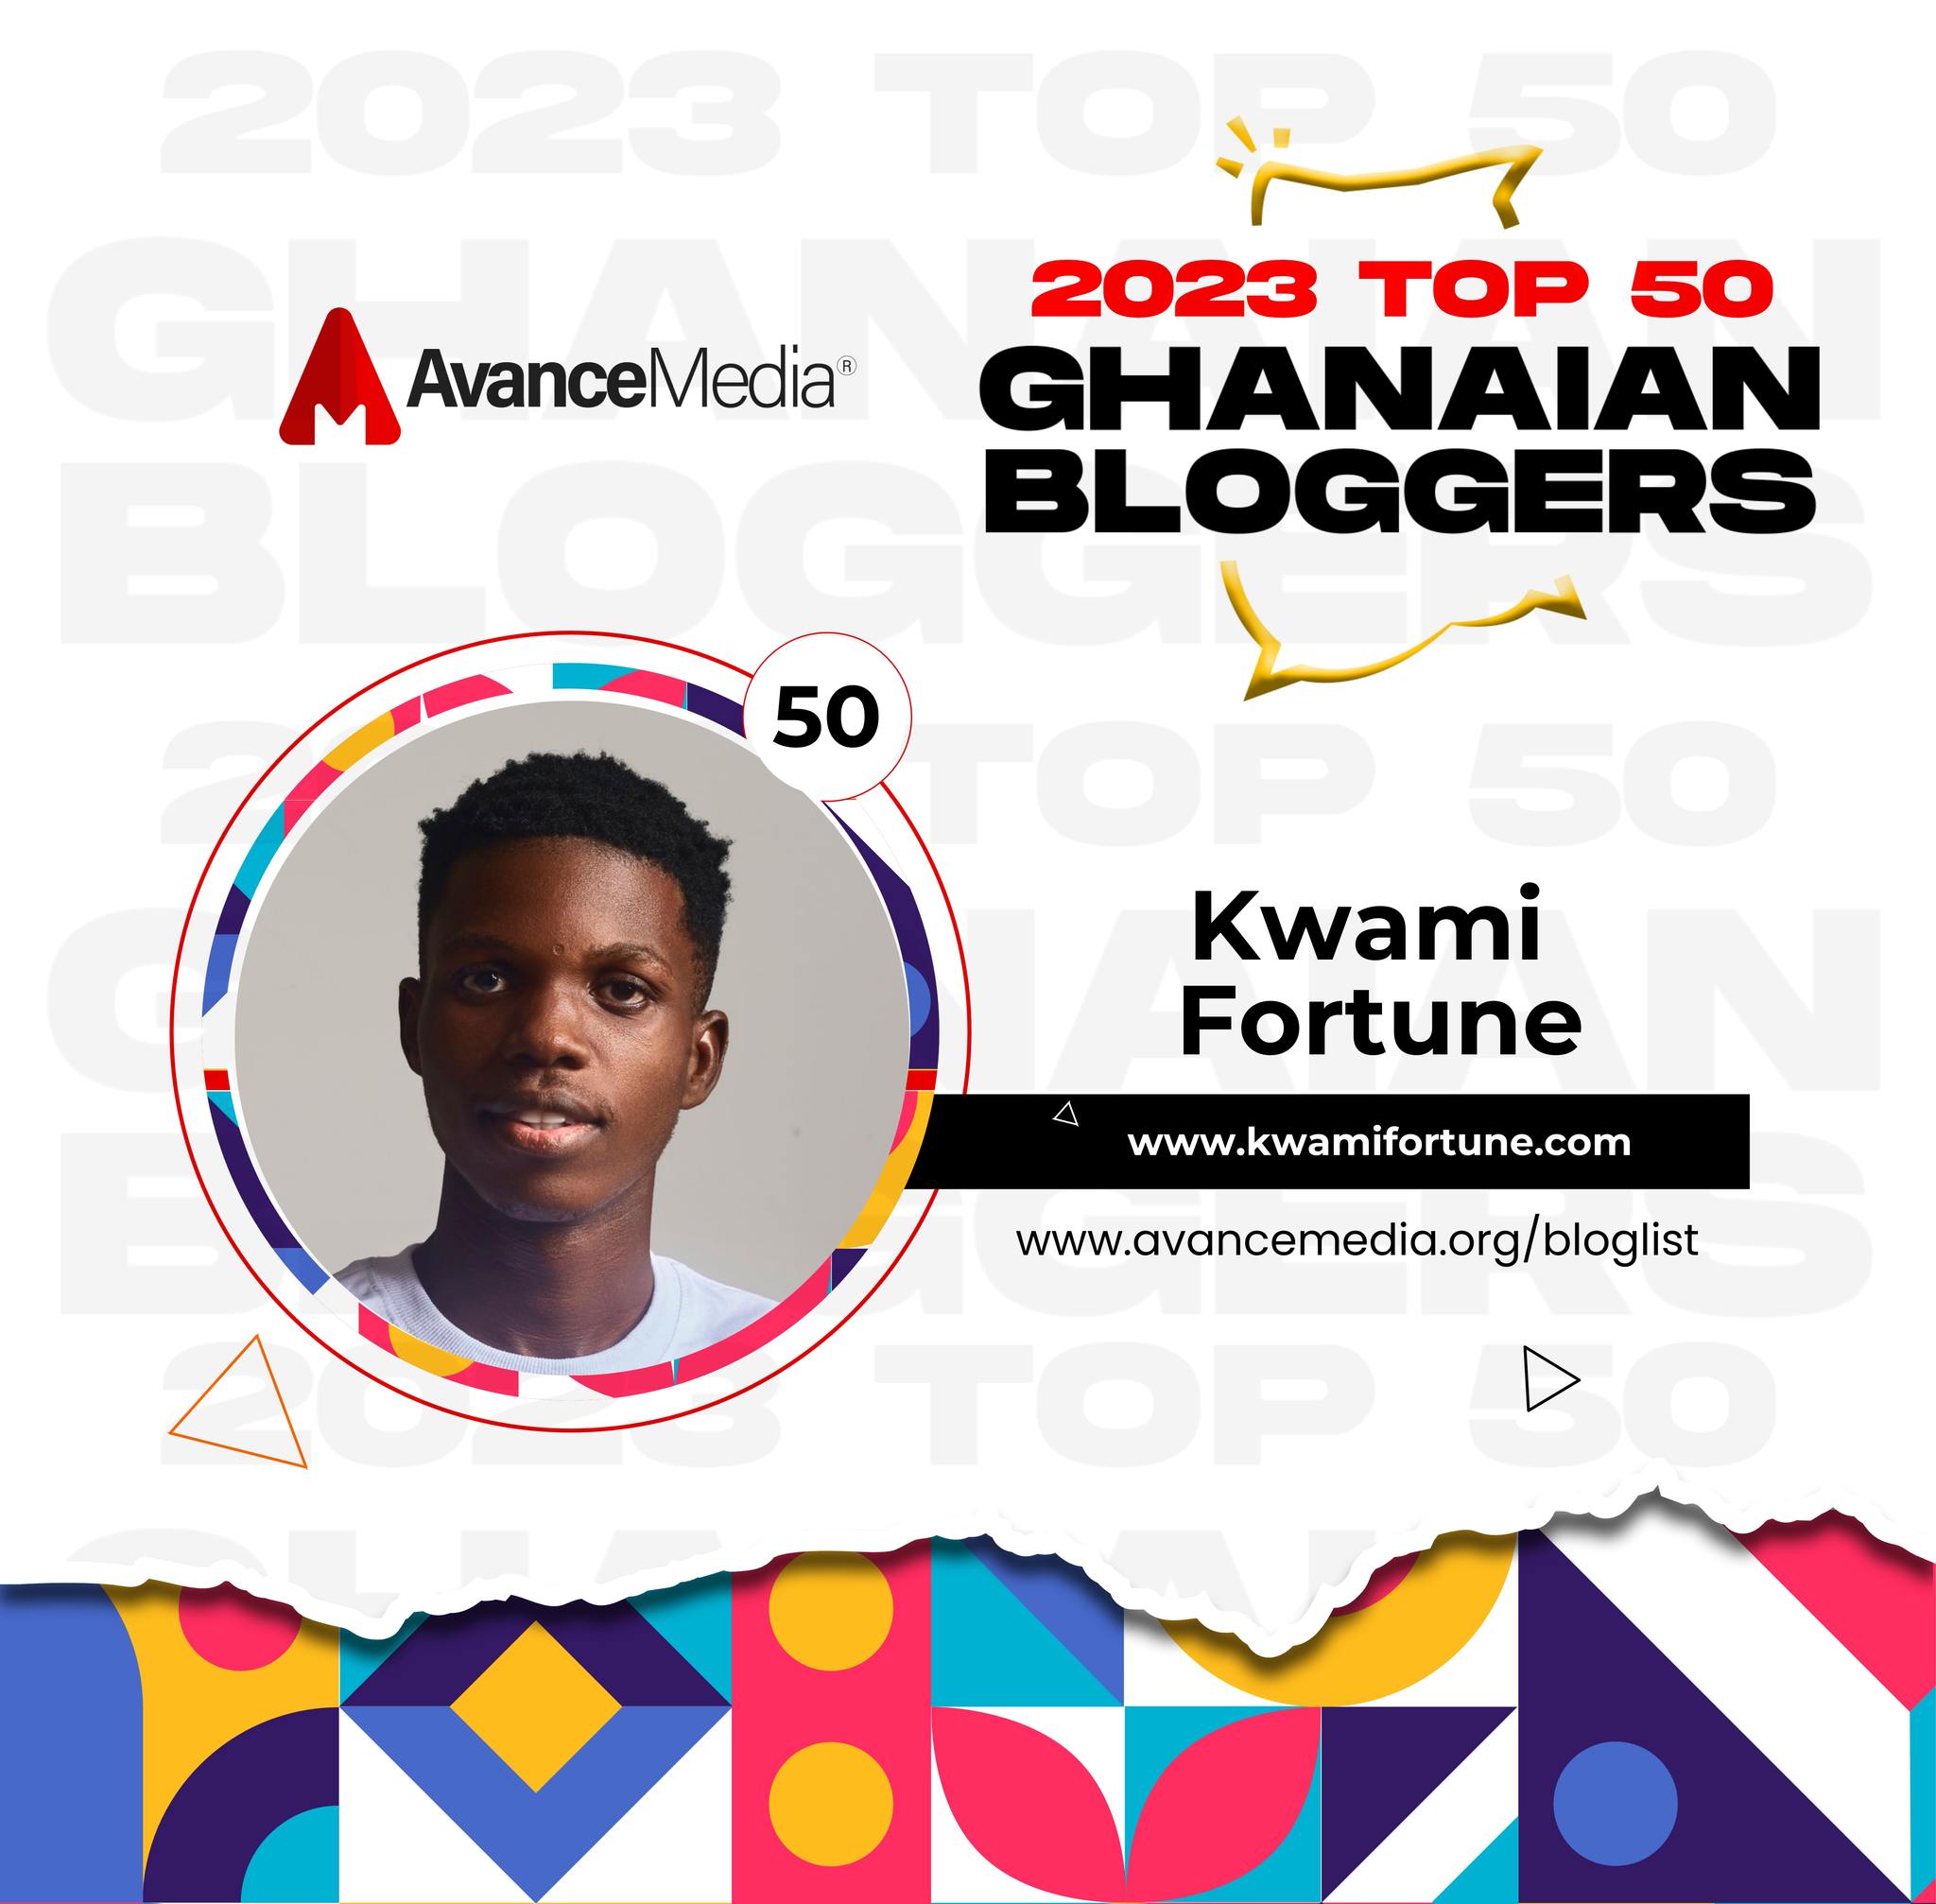 Kwami Fortune makes the prestigious list of Ghana's Top 50 Bloggers of 2023